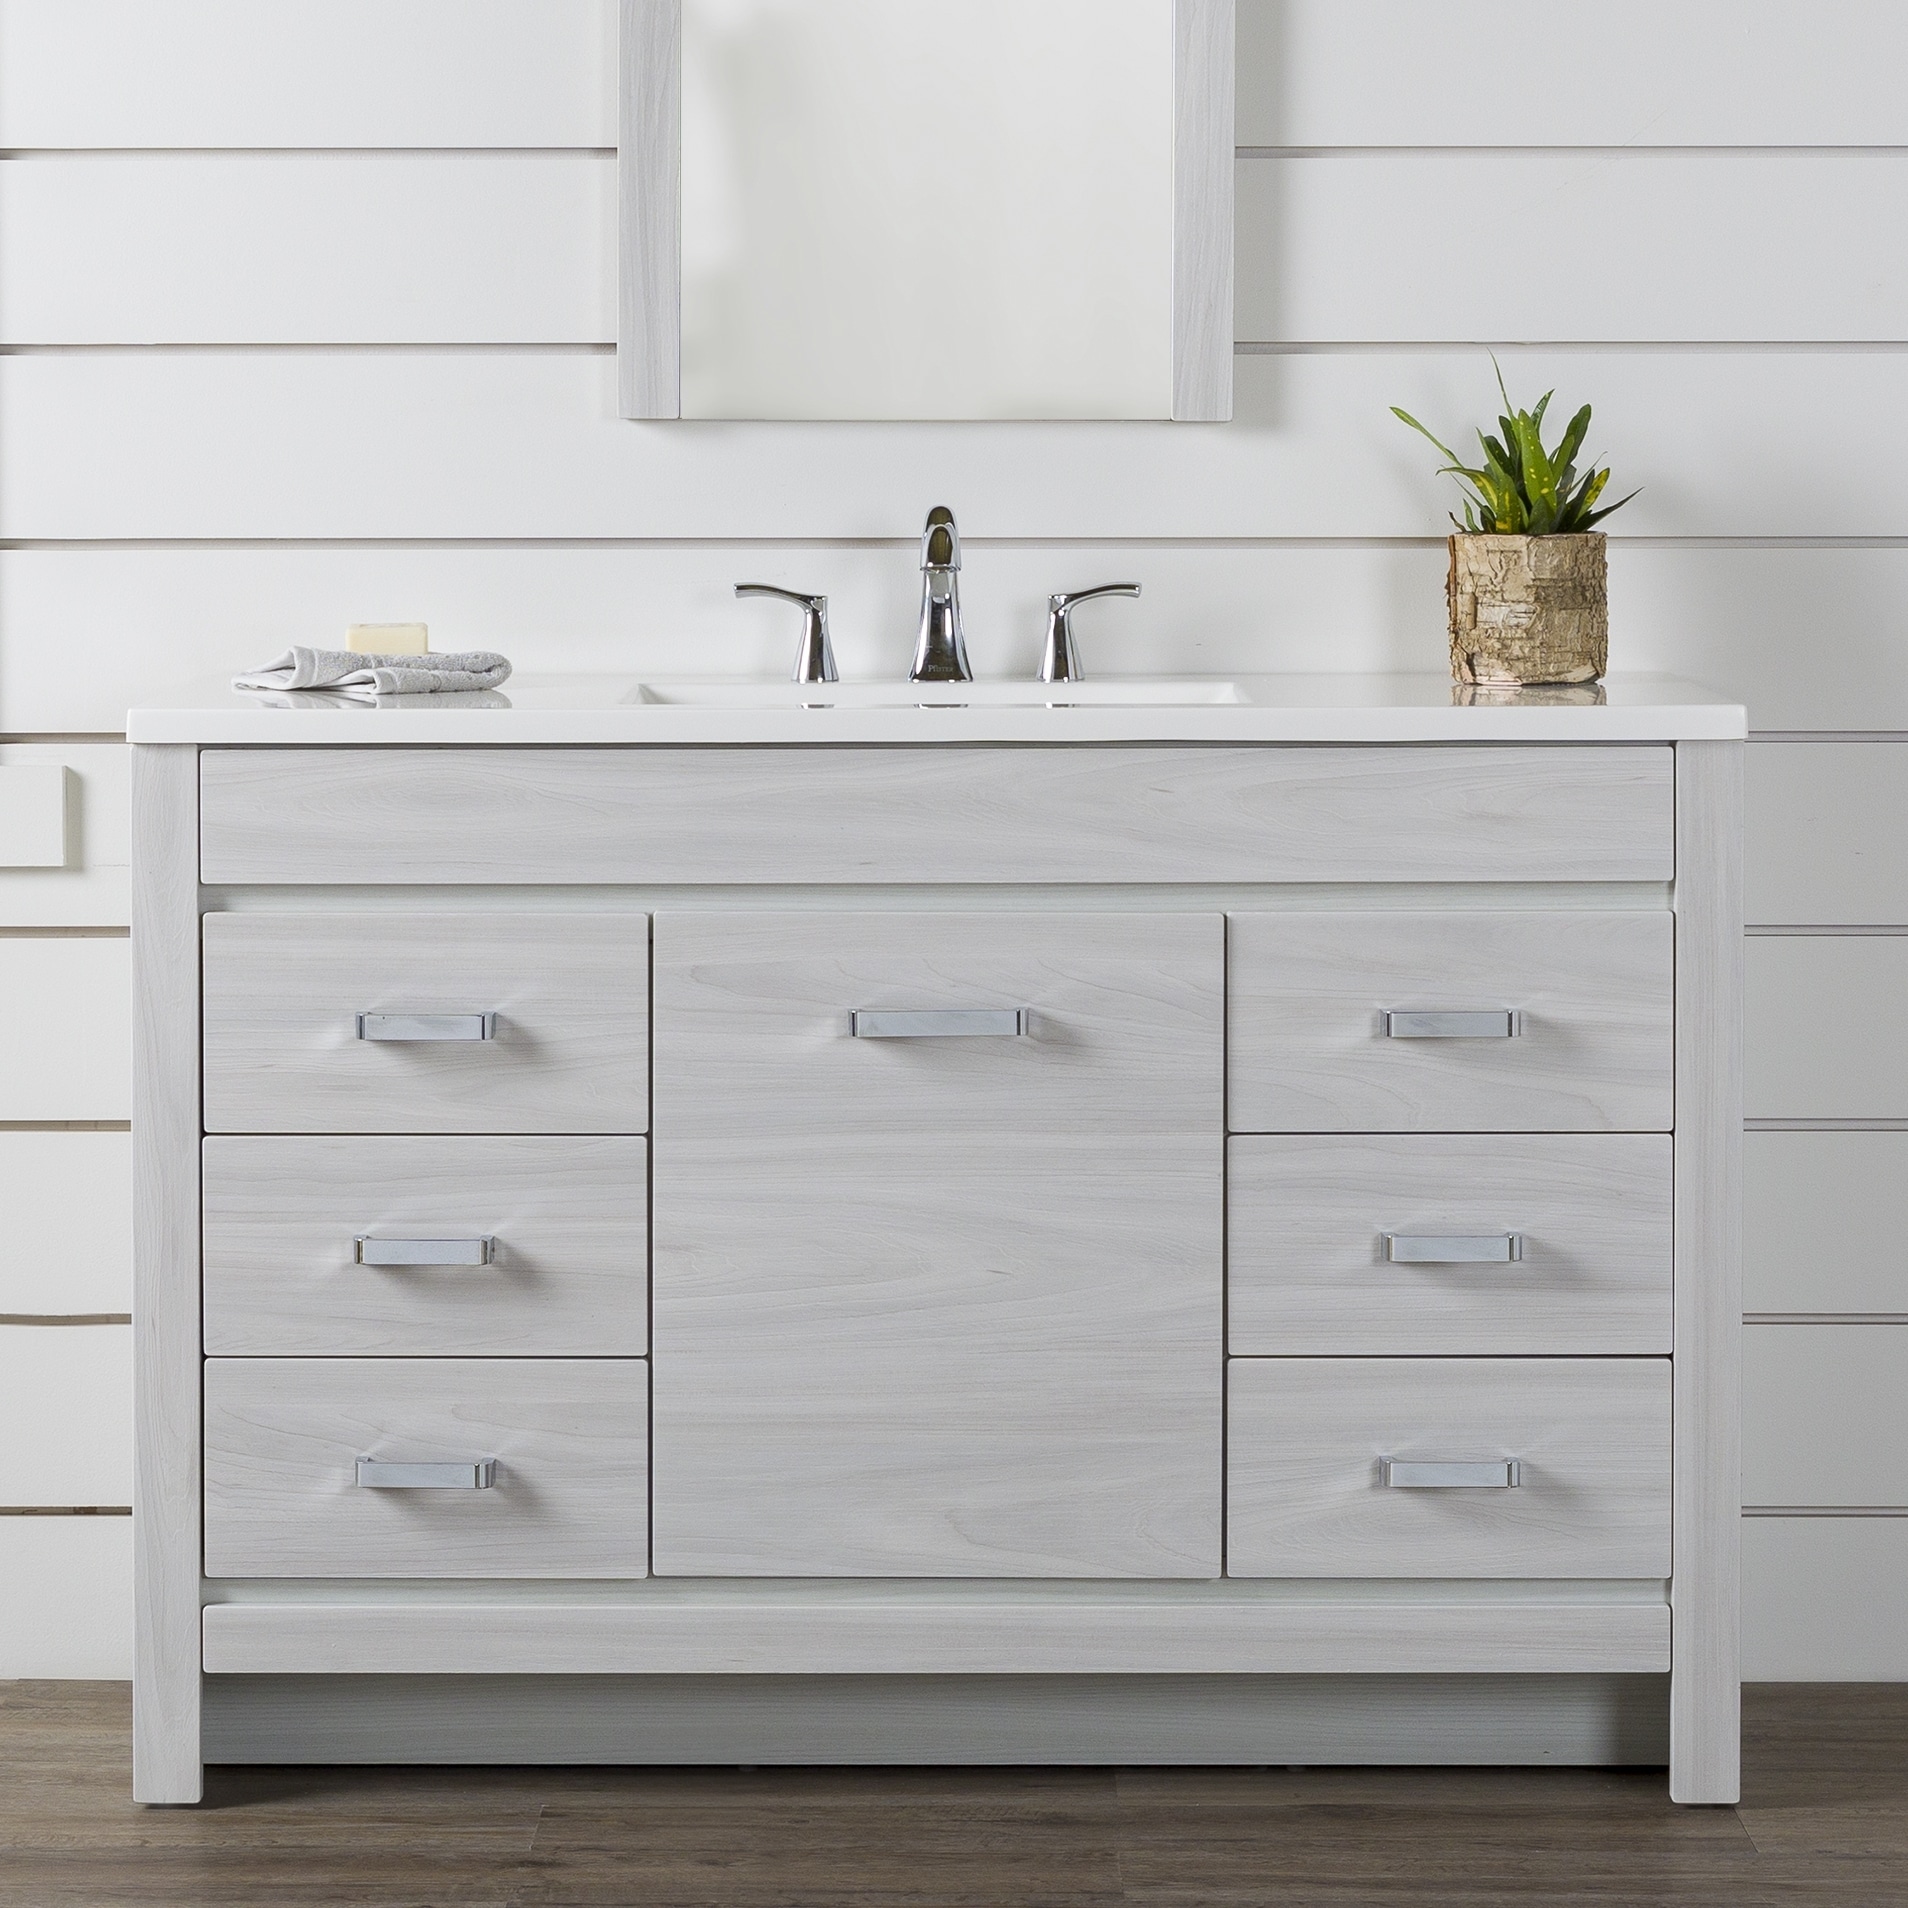 1pc Bathroom Shelf, Maximize Your Bath Space With This Punch-free